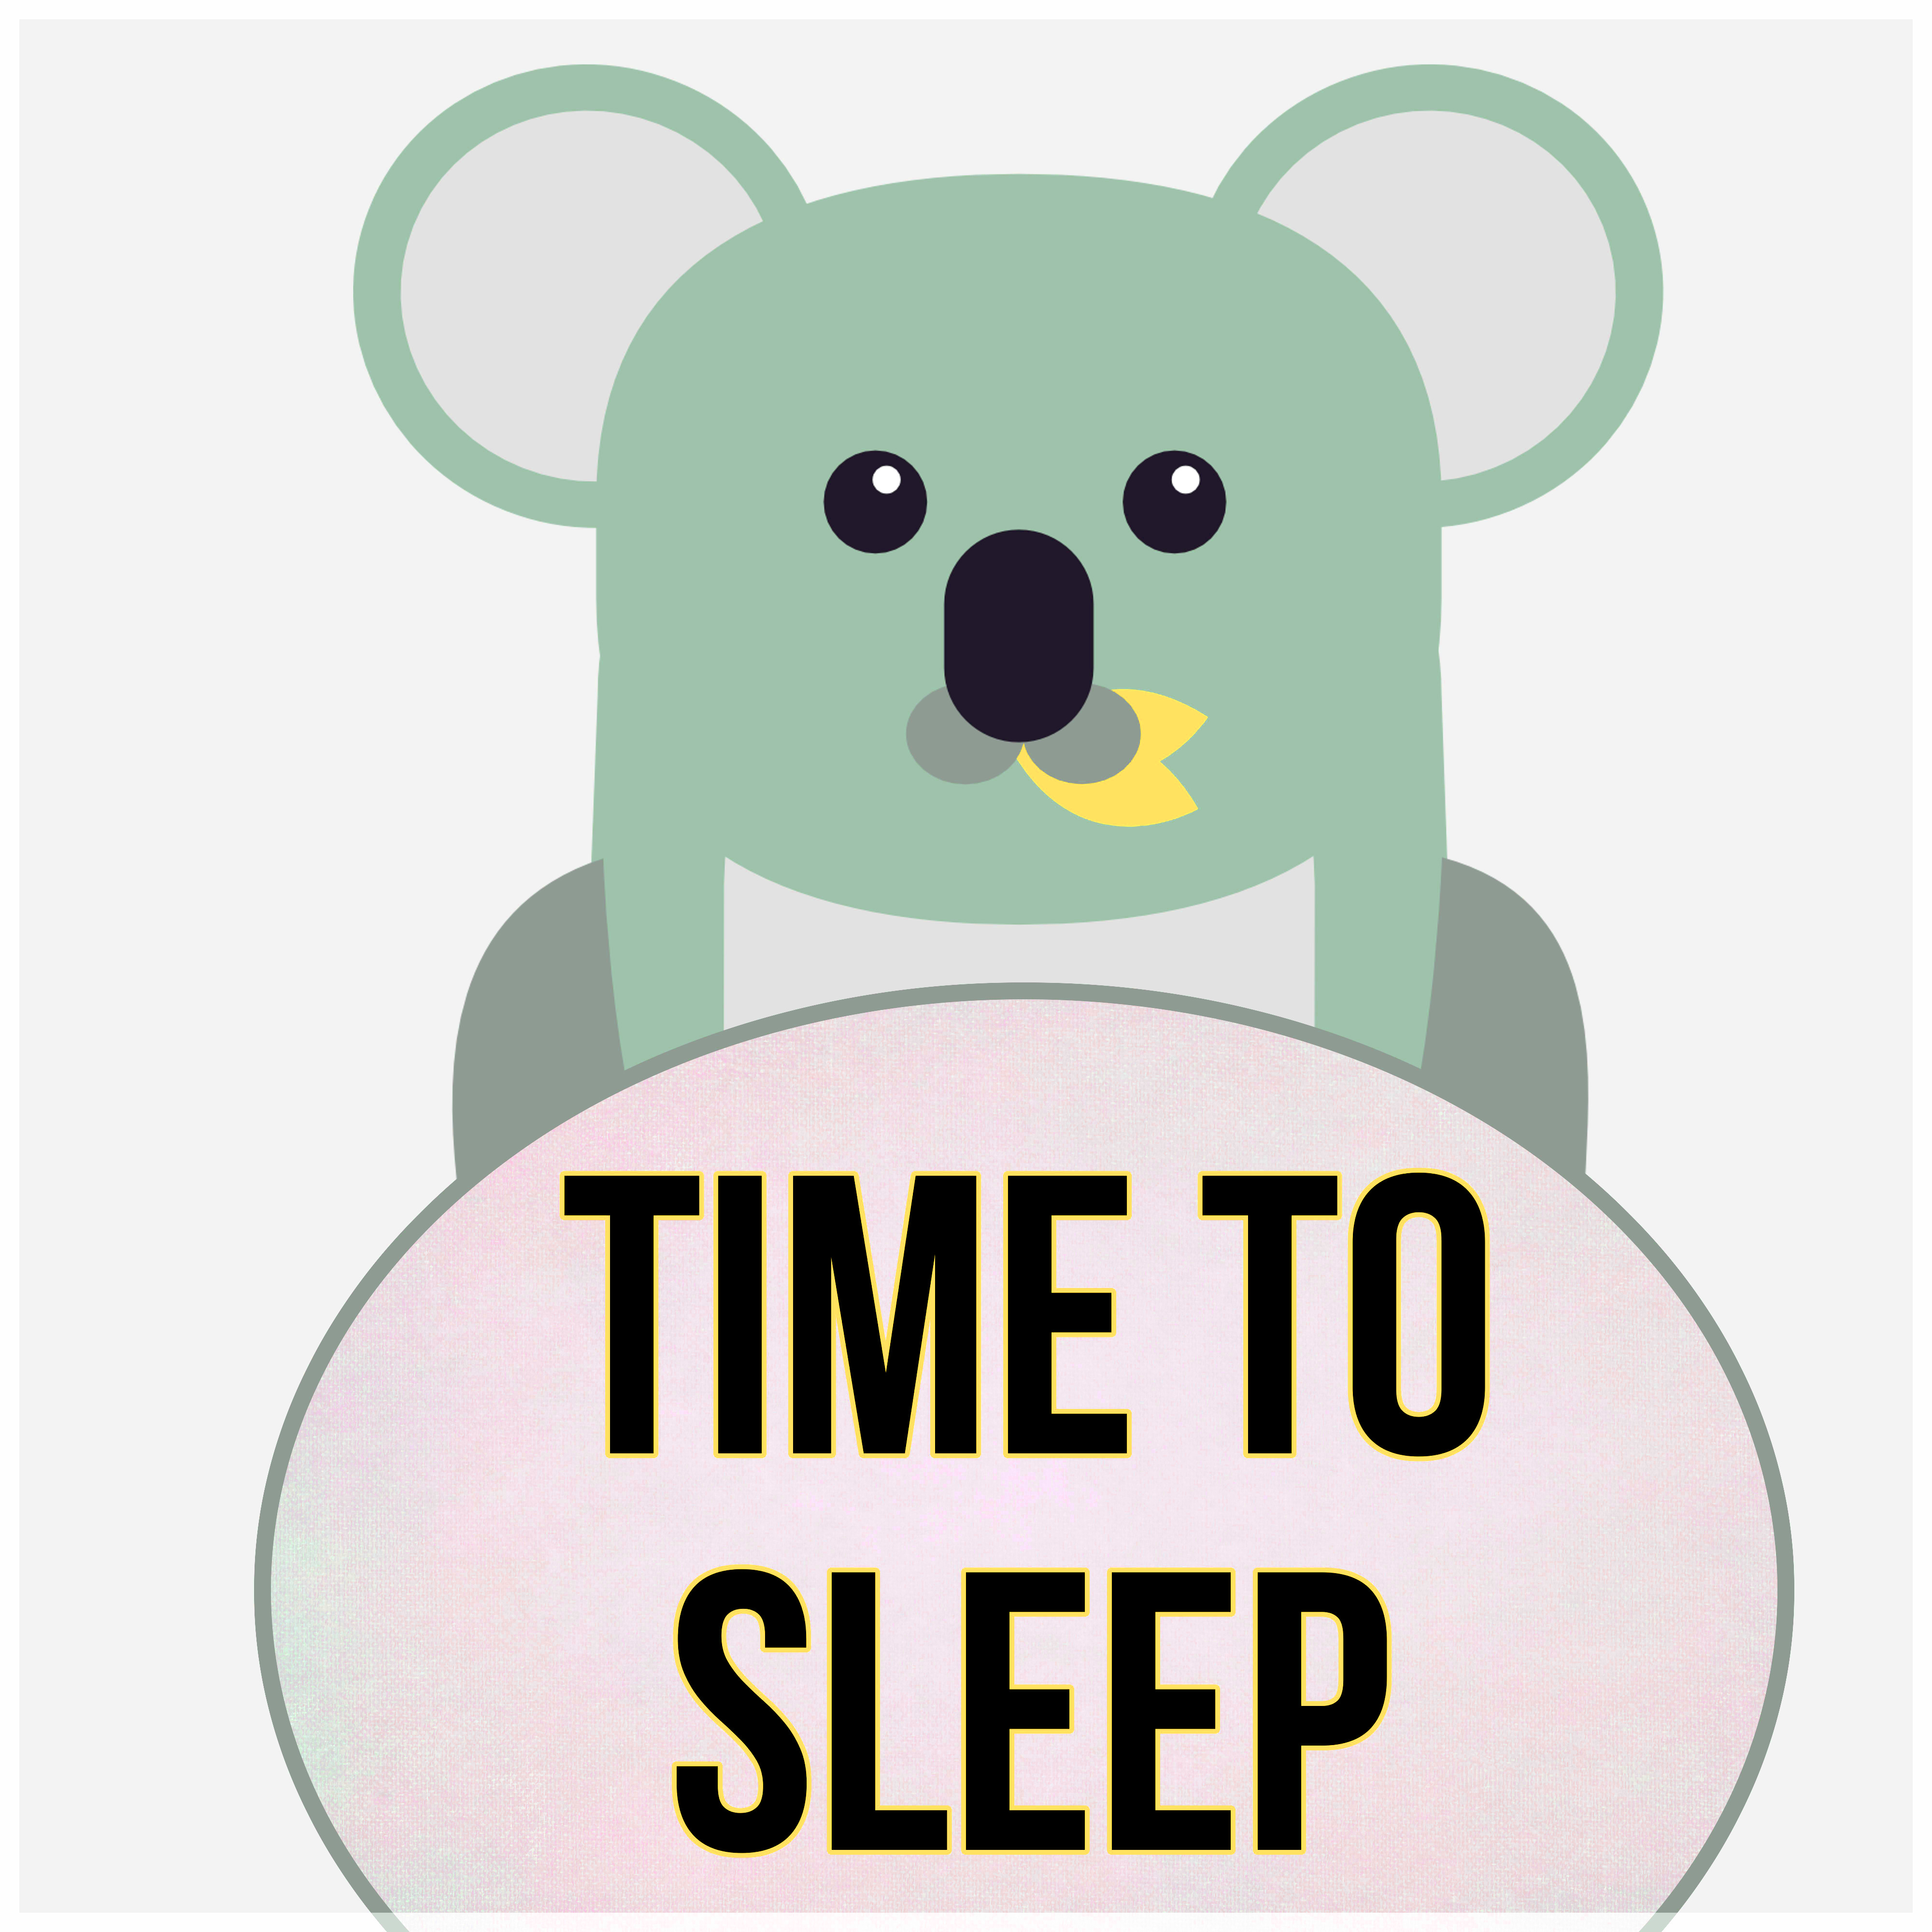 Time to Sleep  Lullabies for Toddlers, Relaxing Songs for Babies, Southing Sounds, Sleeping Baby Aid, White Noise for Deep Sleep